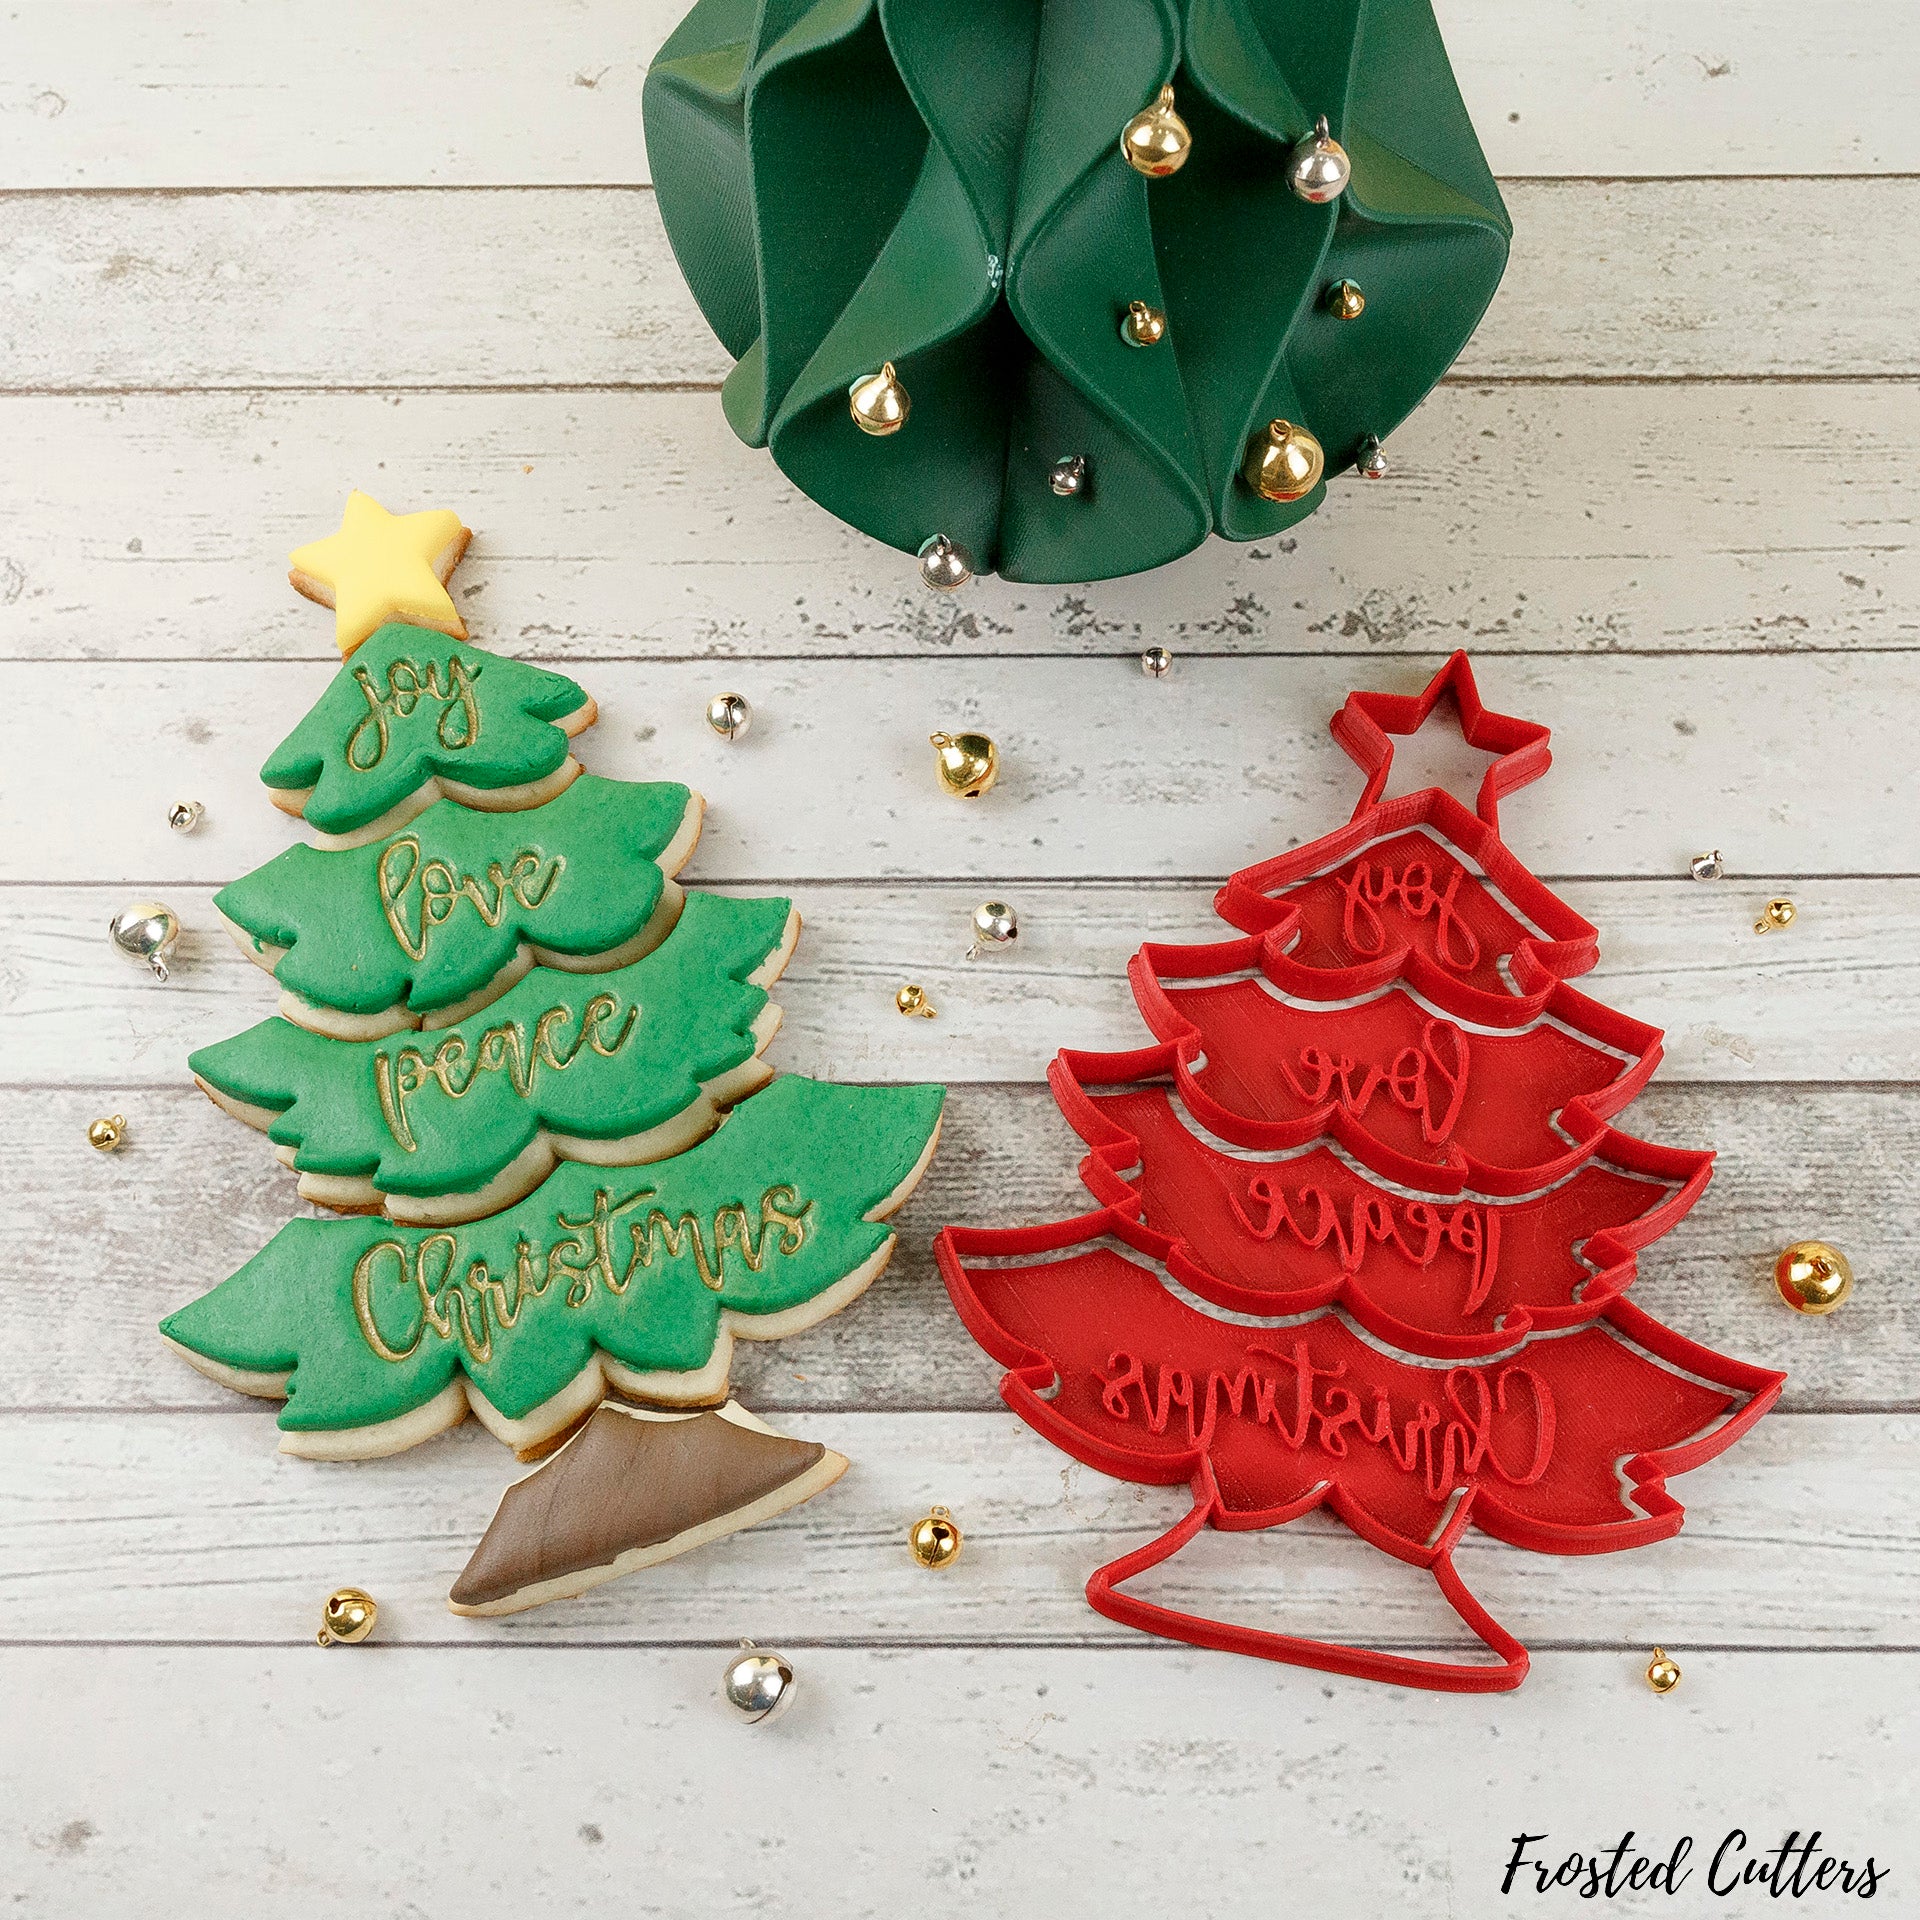 Christmas Tree Puzzle Cookie Cutter - Lekue - OliveNation